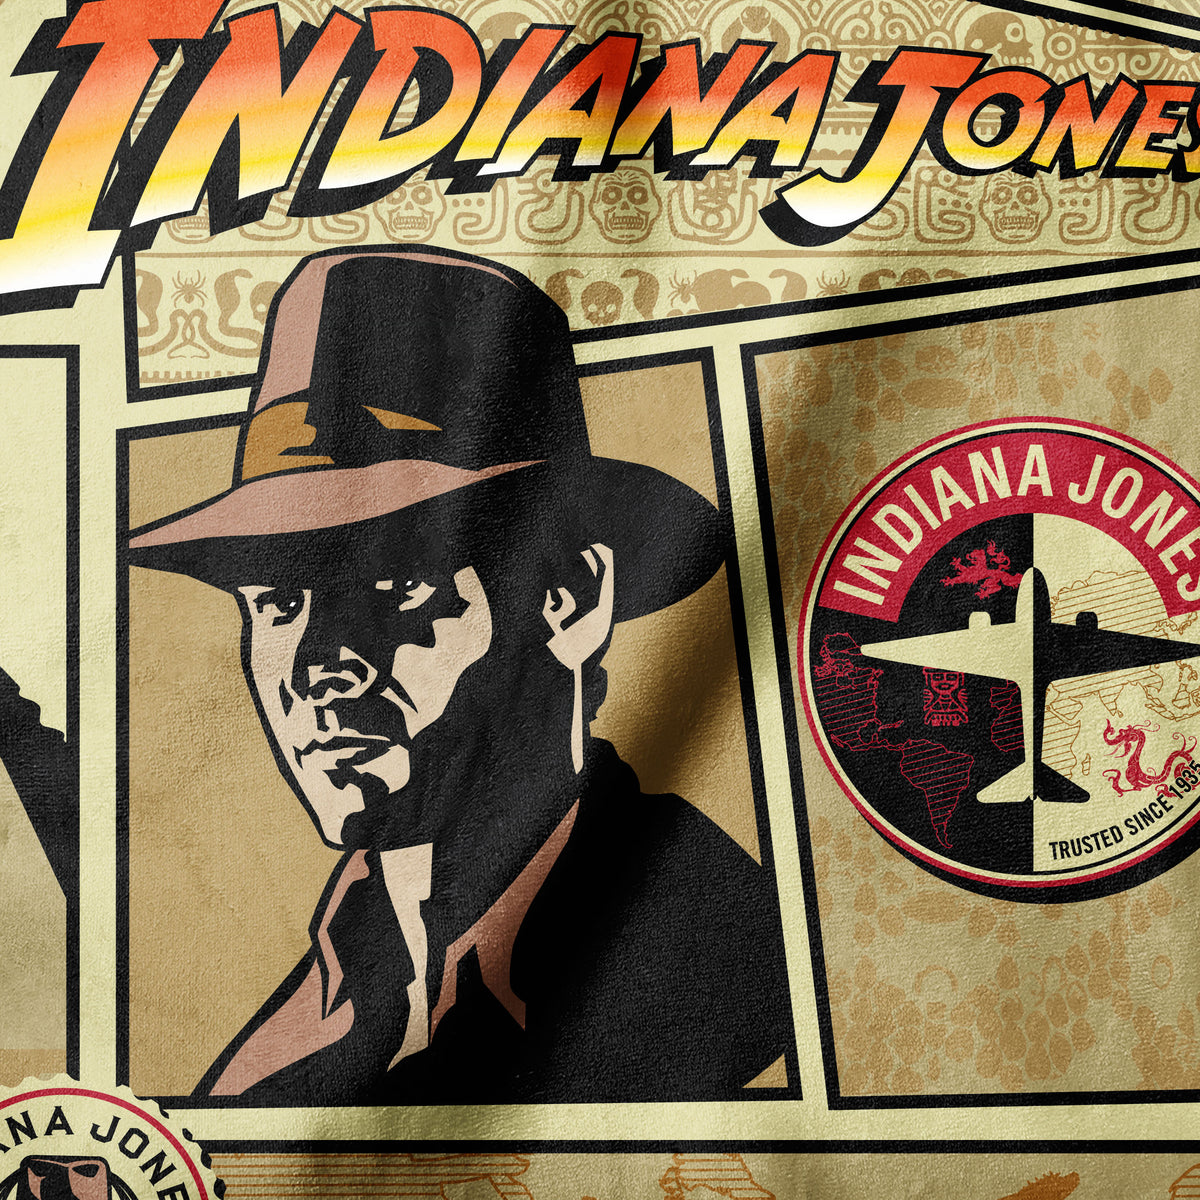 Indiana Jones Collection - Indiana Frames